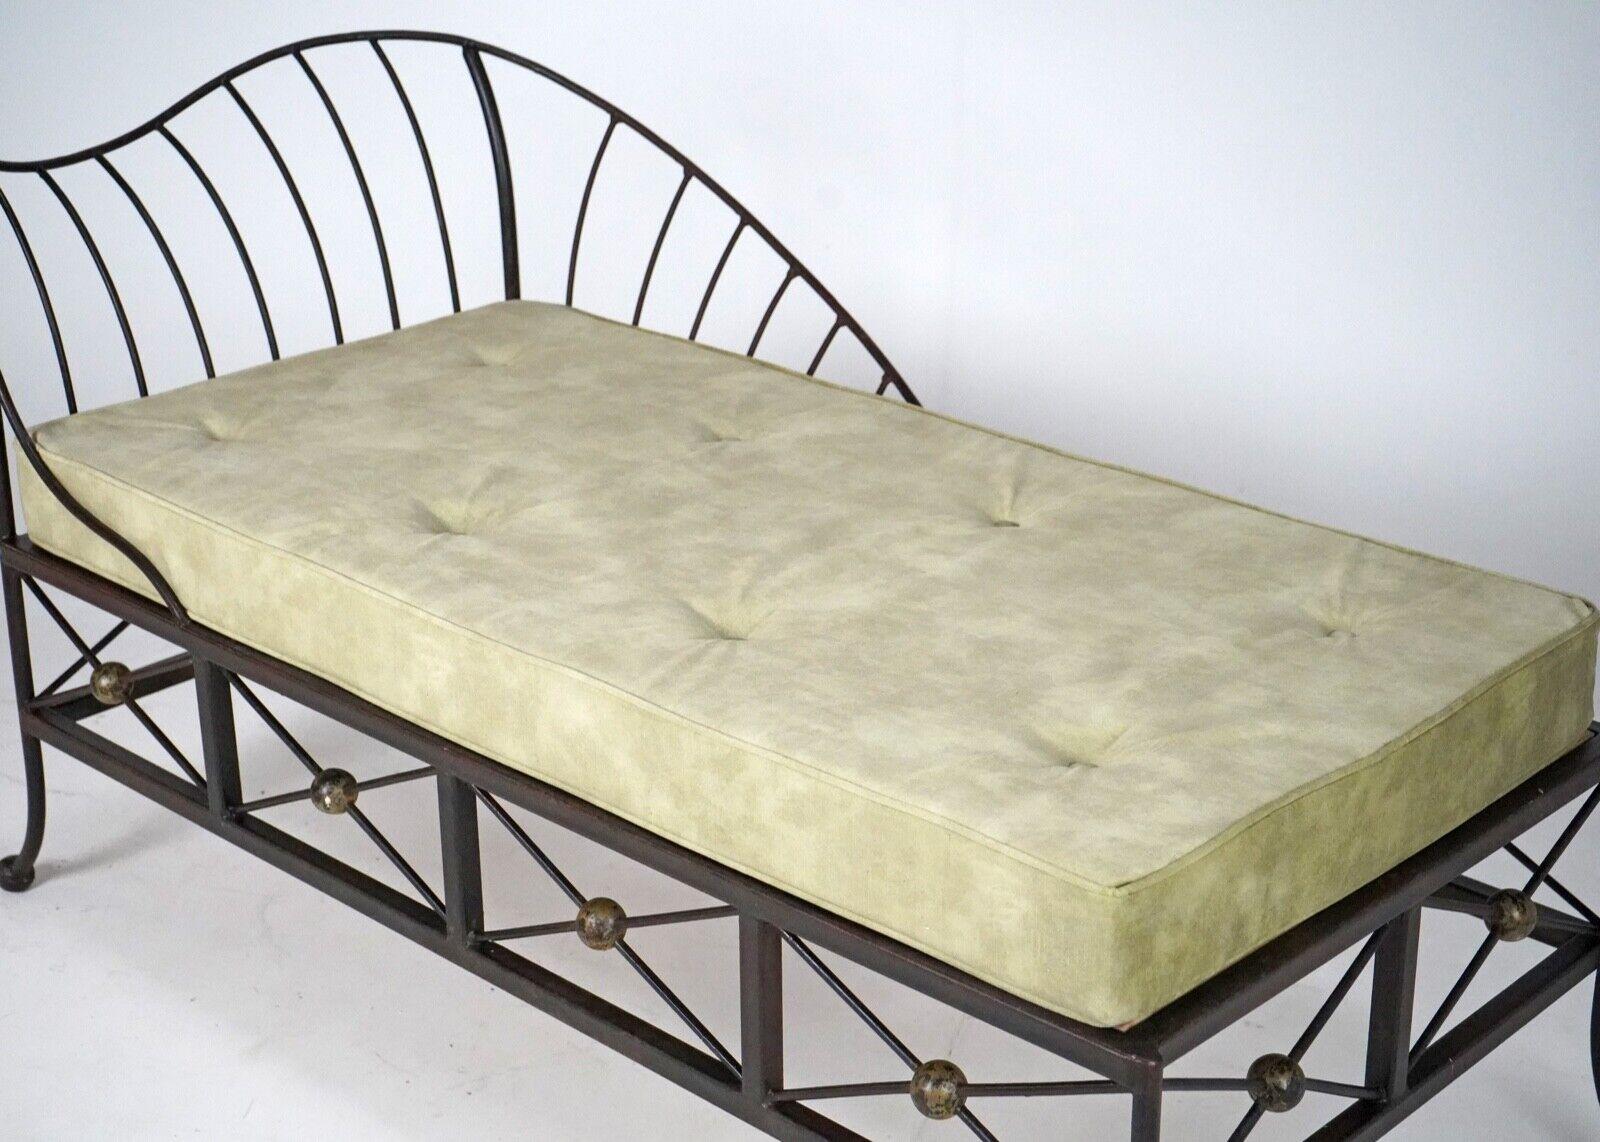 Vintage French Box Steel Metal Day Bed, Sun Lounger, Chaise Lounge Green Seat 9